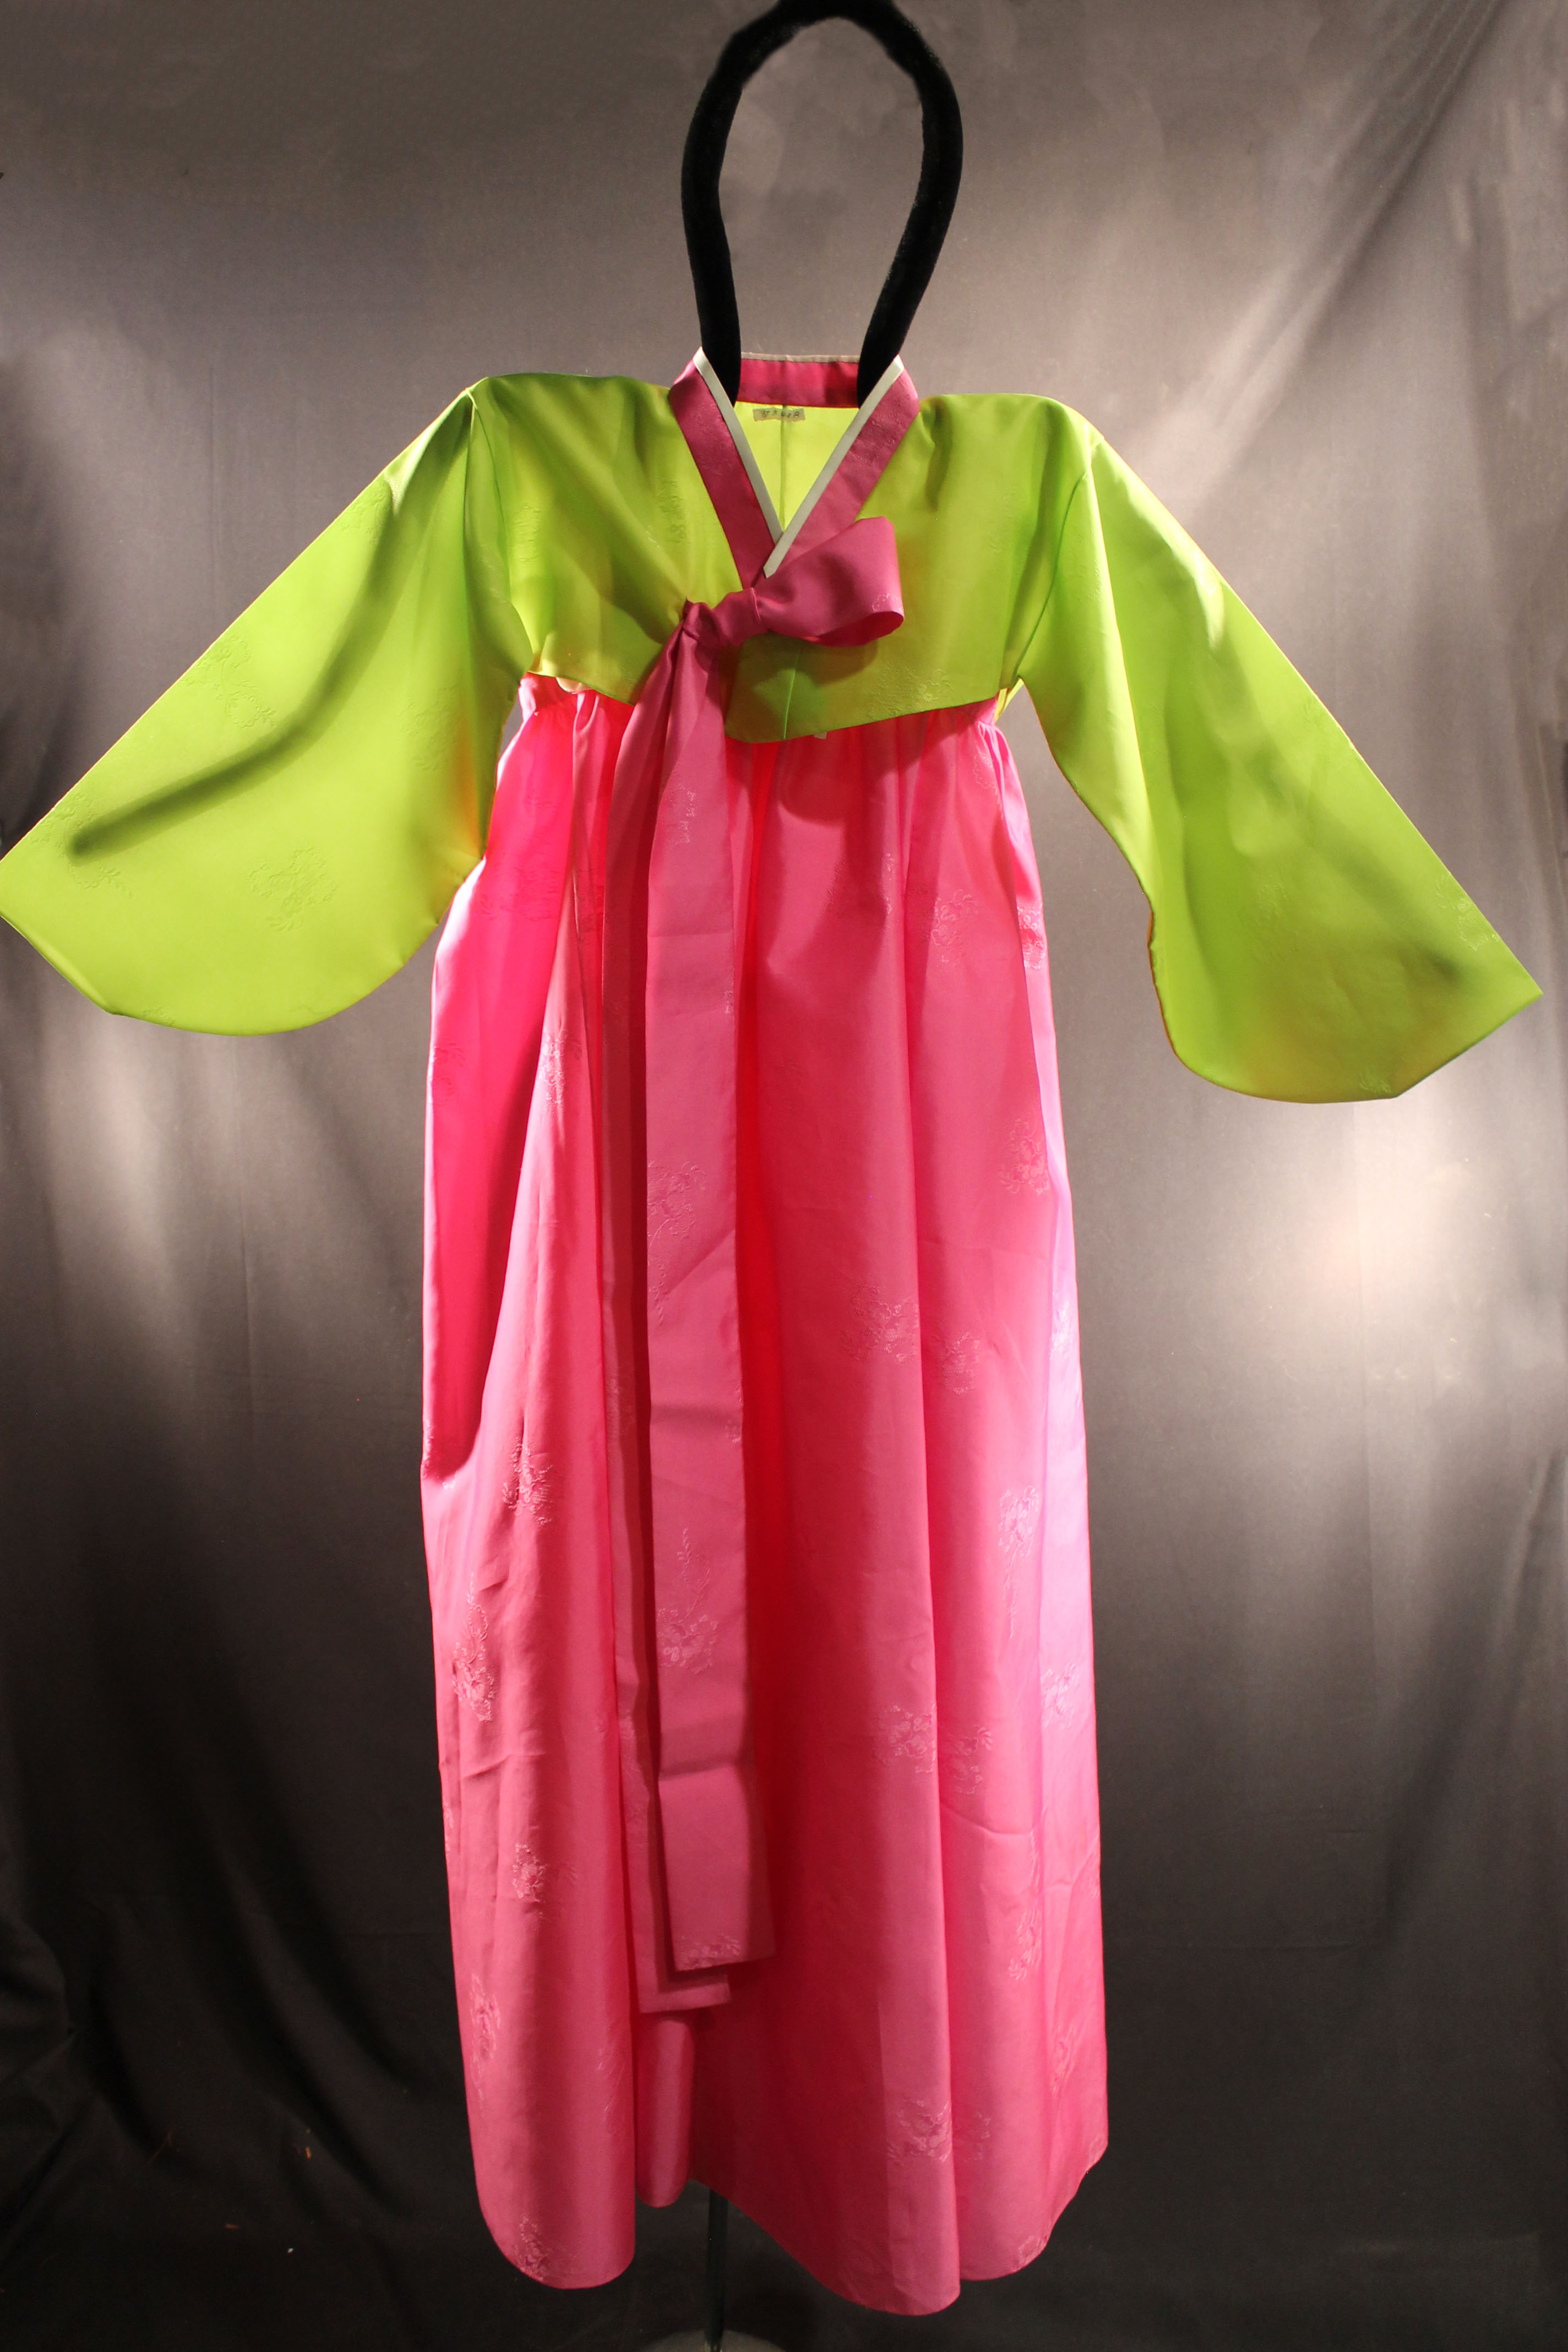 The skirt of the garment is made of hot pink sheer fabric. The jacket is lime green with a hot pink and white belt that is tied into a bow. Both fabrics featured raised floral patterns. 